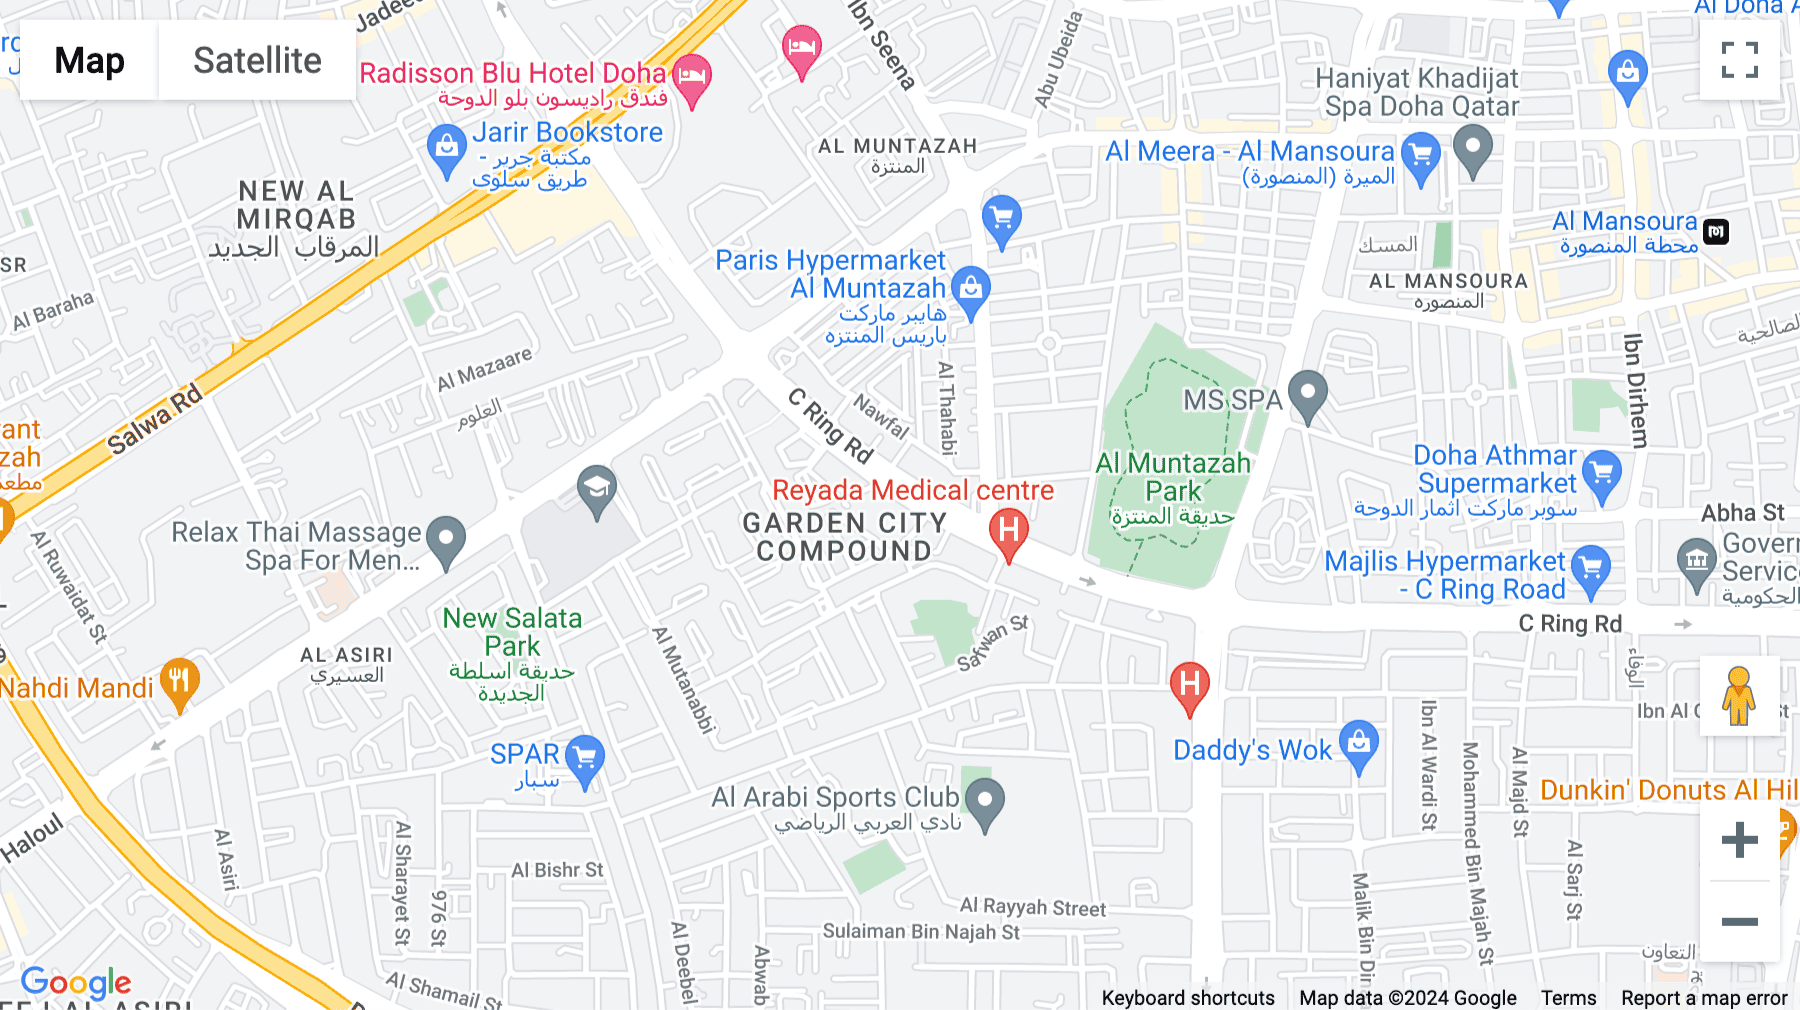 Click for interative map of Building 311, C Ring Road, Doha